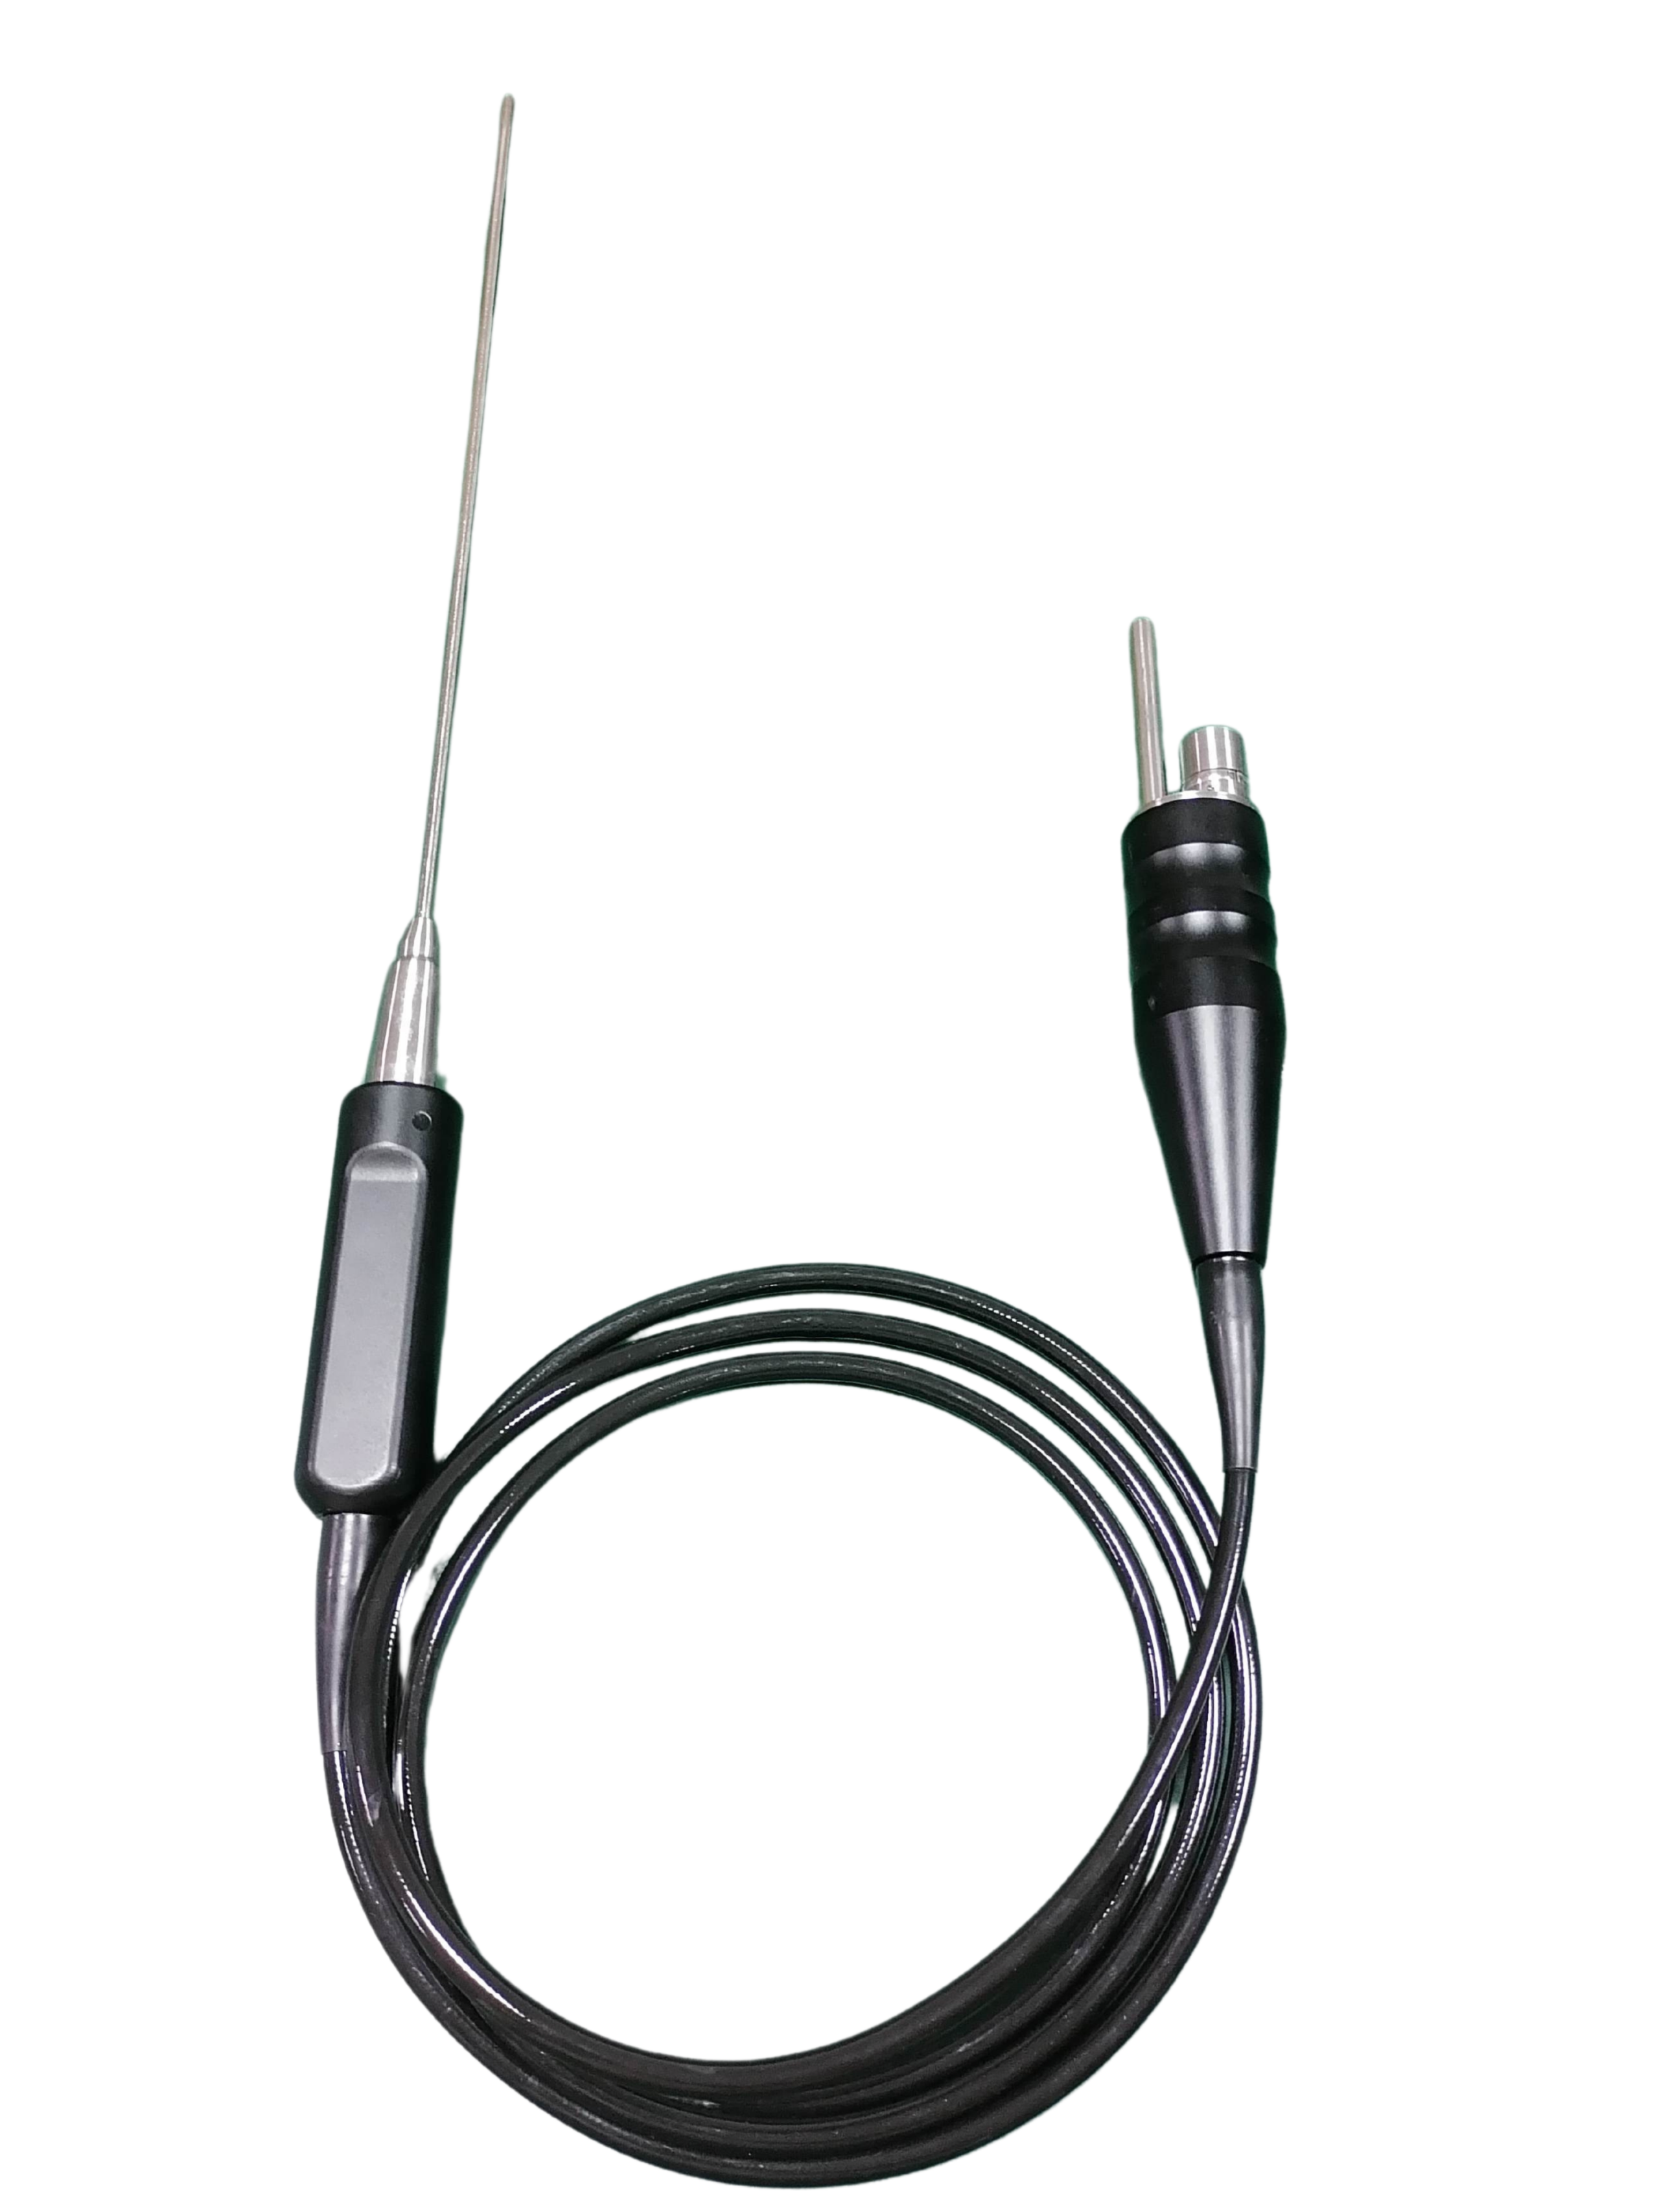 Rigid endoscope with black handle and cable with metallic connectors